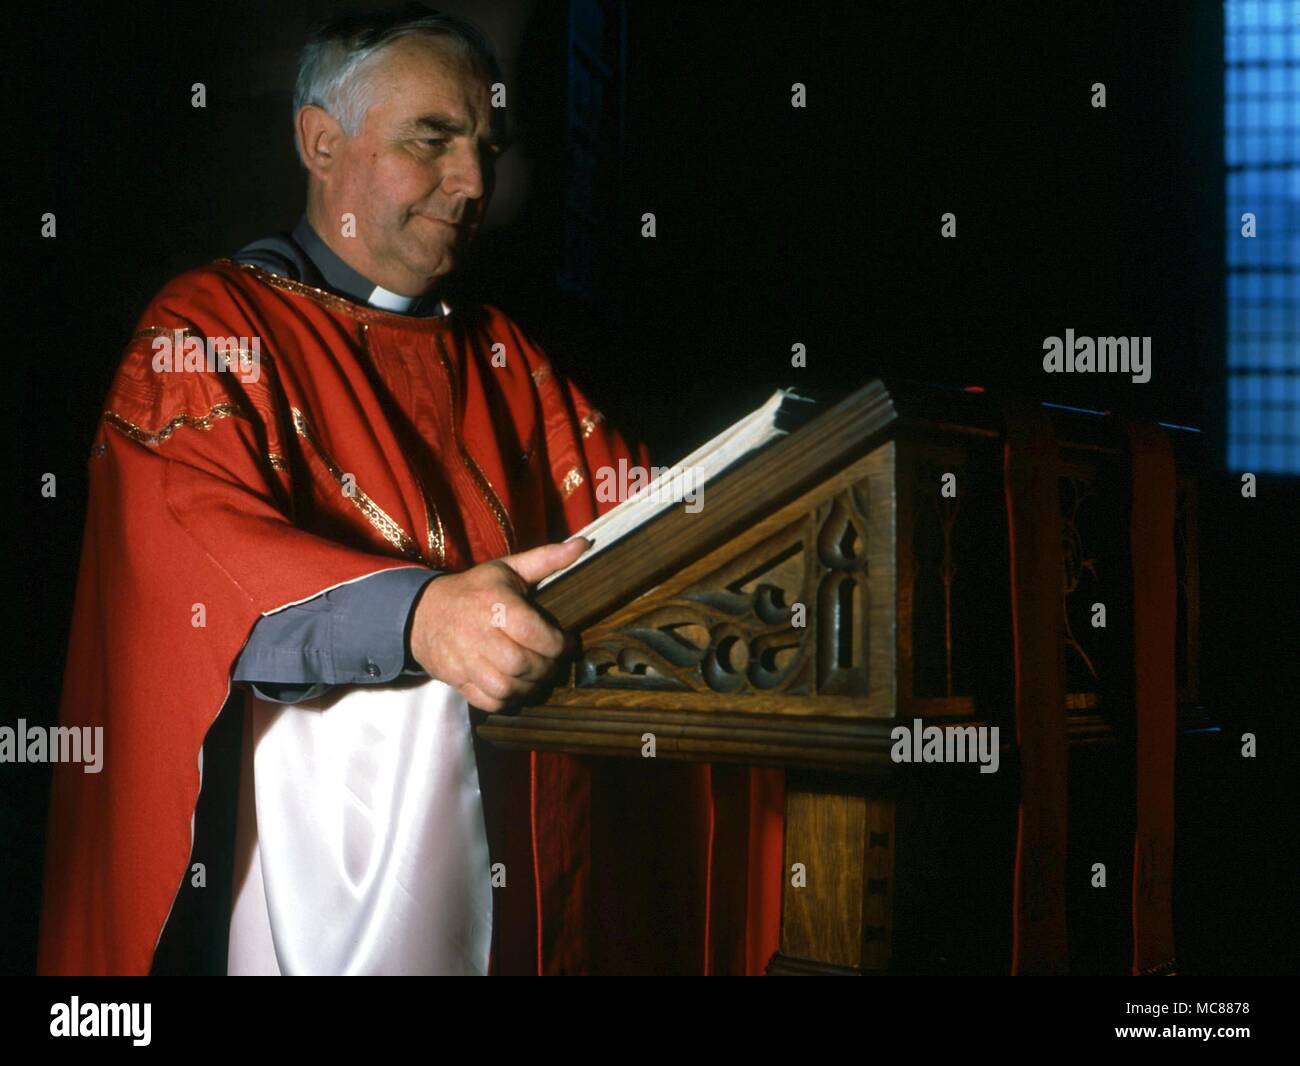 CHRISTIAN Anglican priest reading from the Holy Bible at a lectern Stock Photo